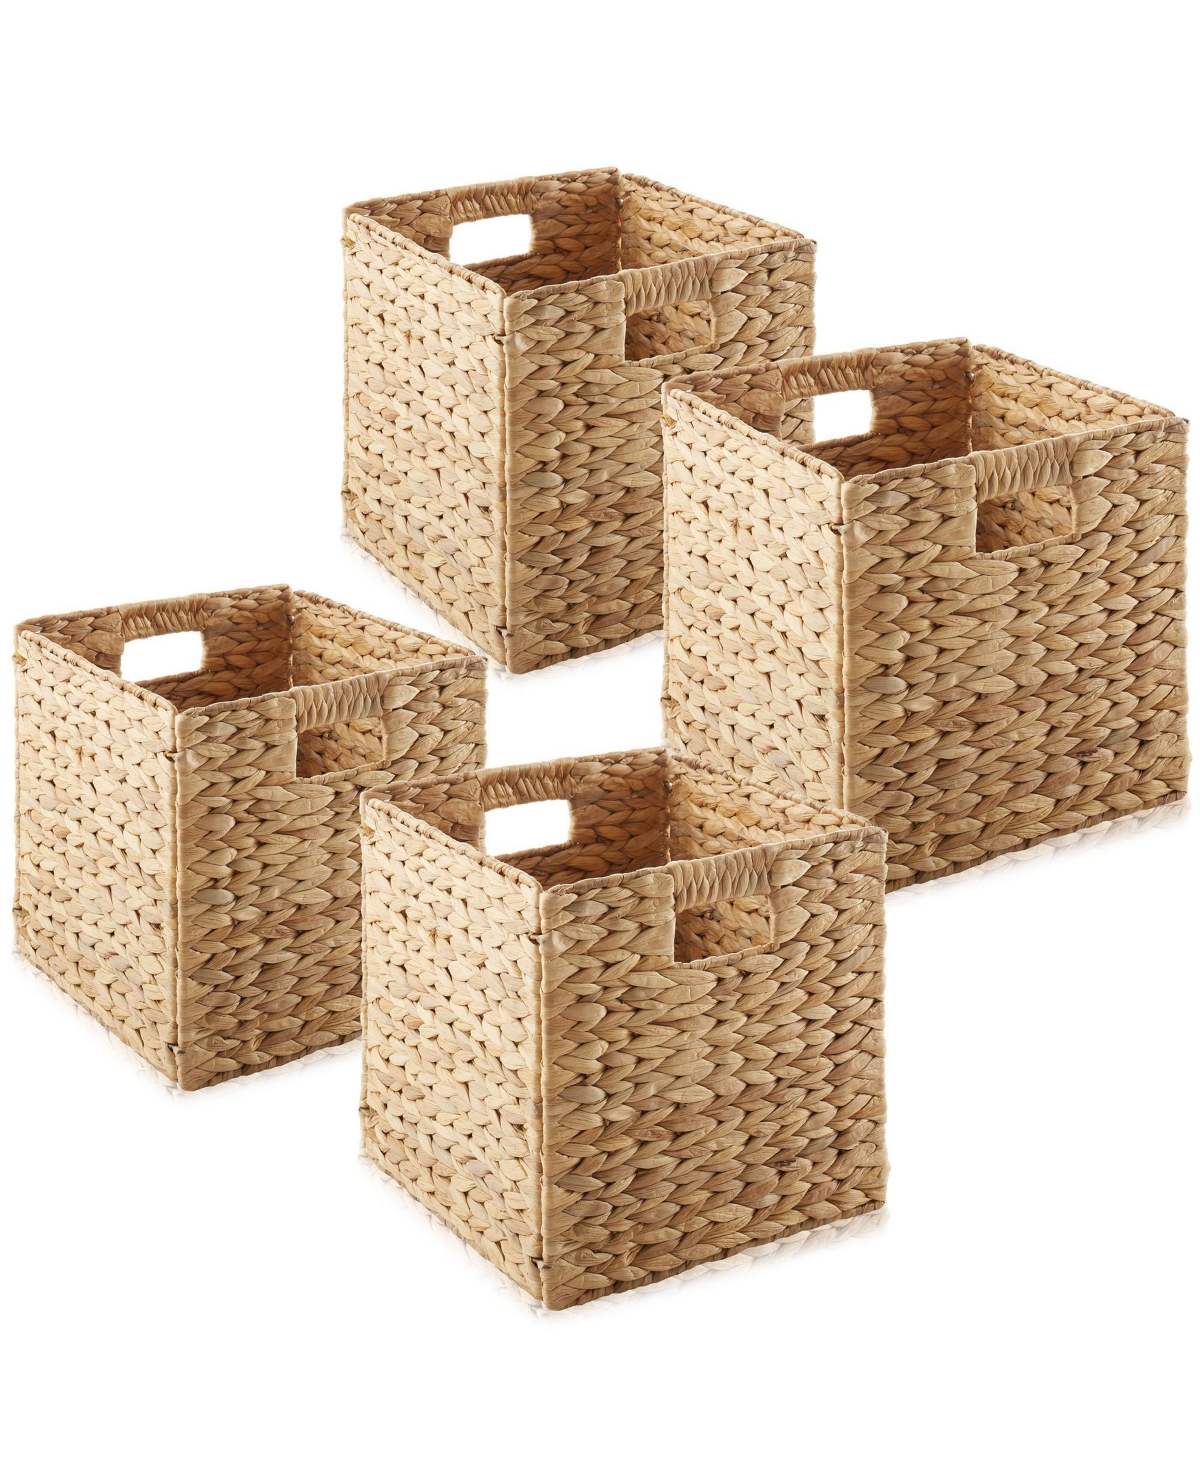 10.5" x 10.5" Water Hyacinth Storage Baskets, Natural - Set of 4 Collapsible Cube Organizers, Woven Bins for Bathroom, Bedroom, Laundry, Pan